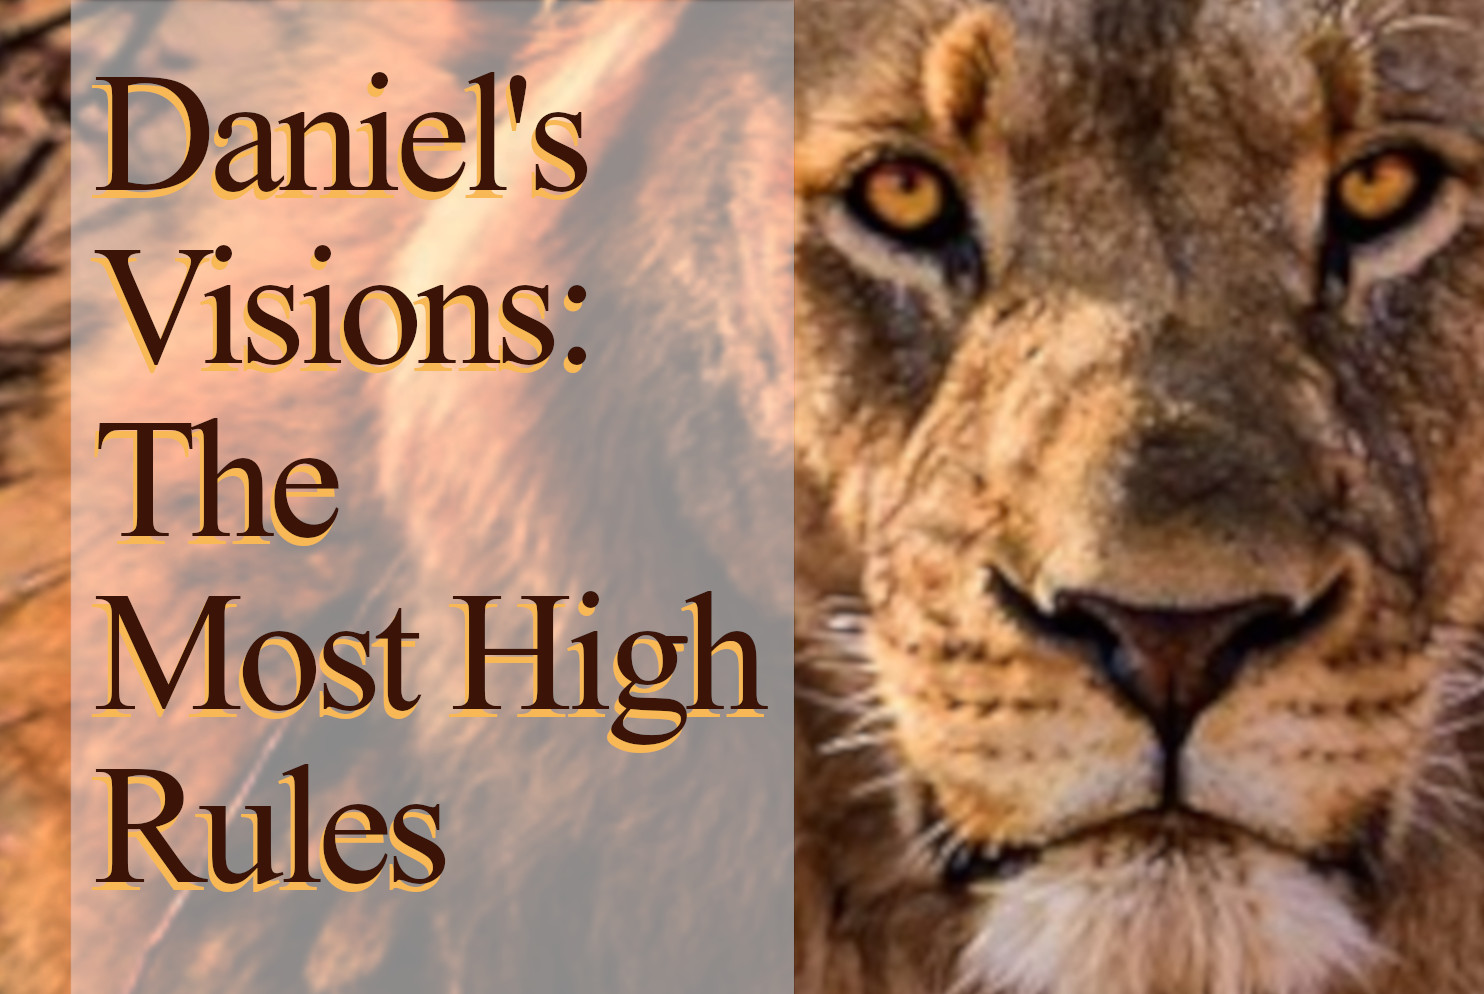 Daniel's Visions: 'The Most High Rules' Sermon series by Nathan Clarke